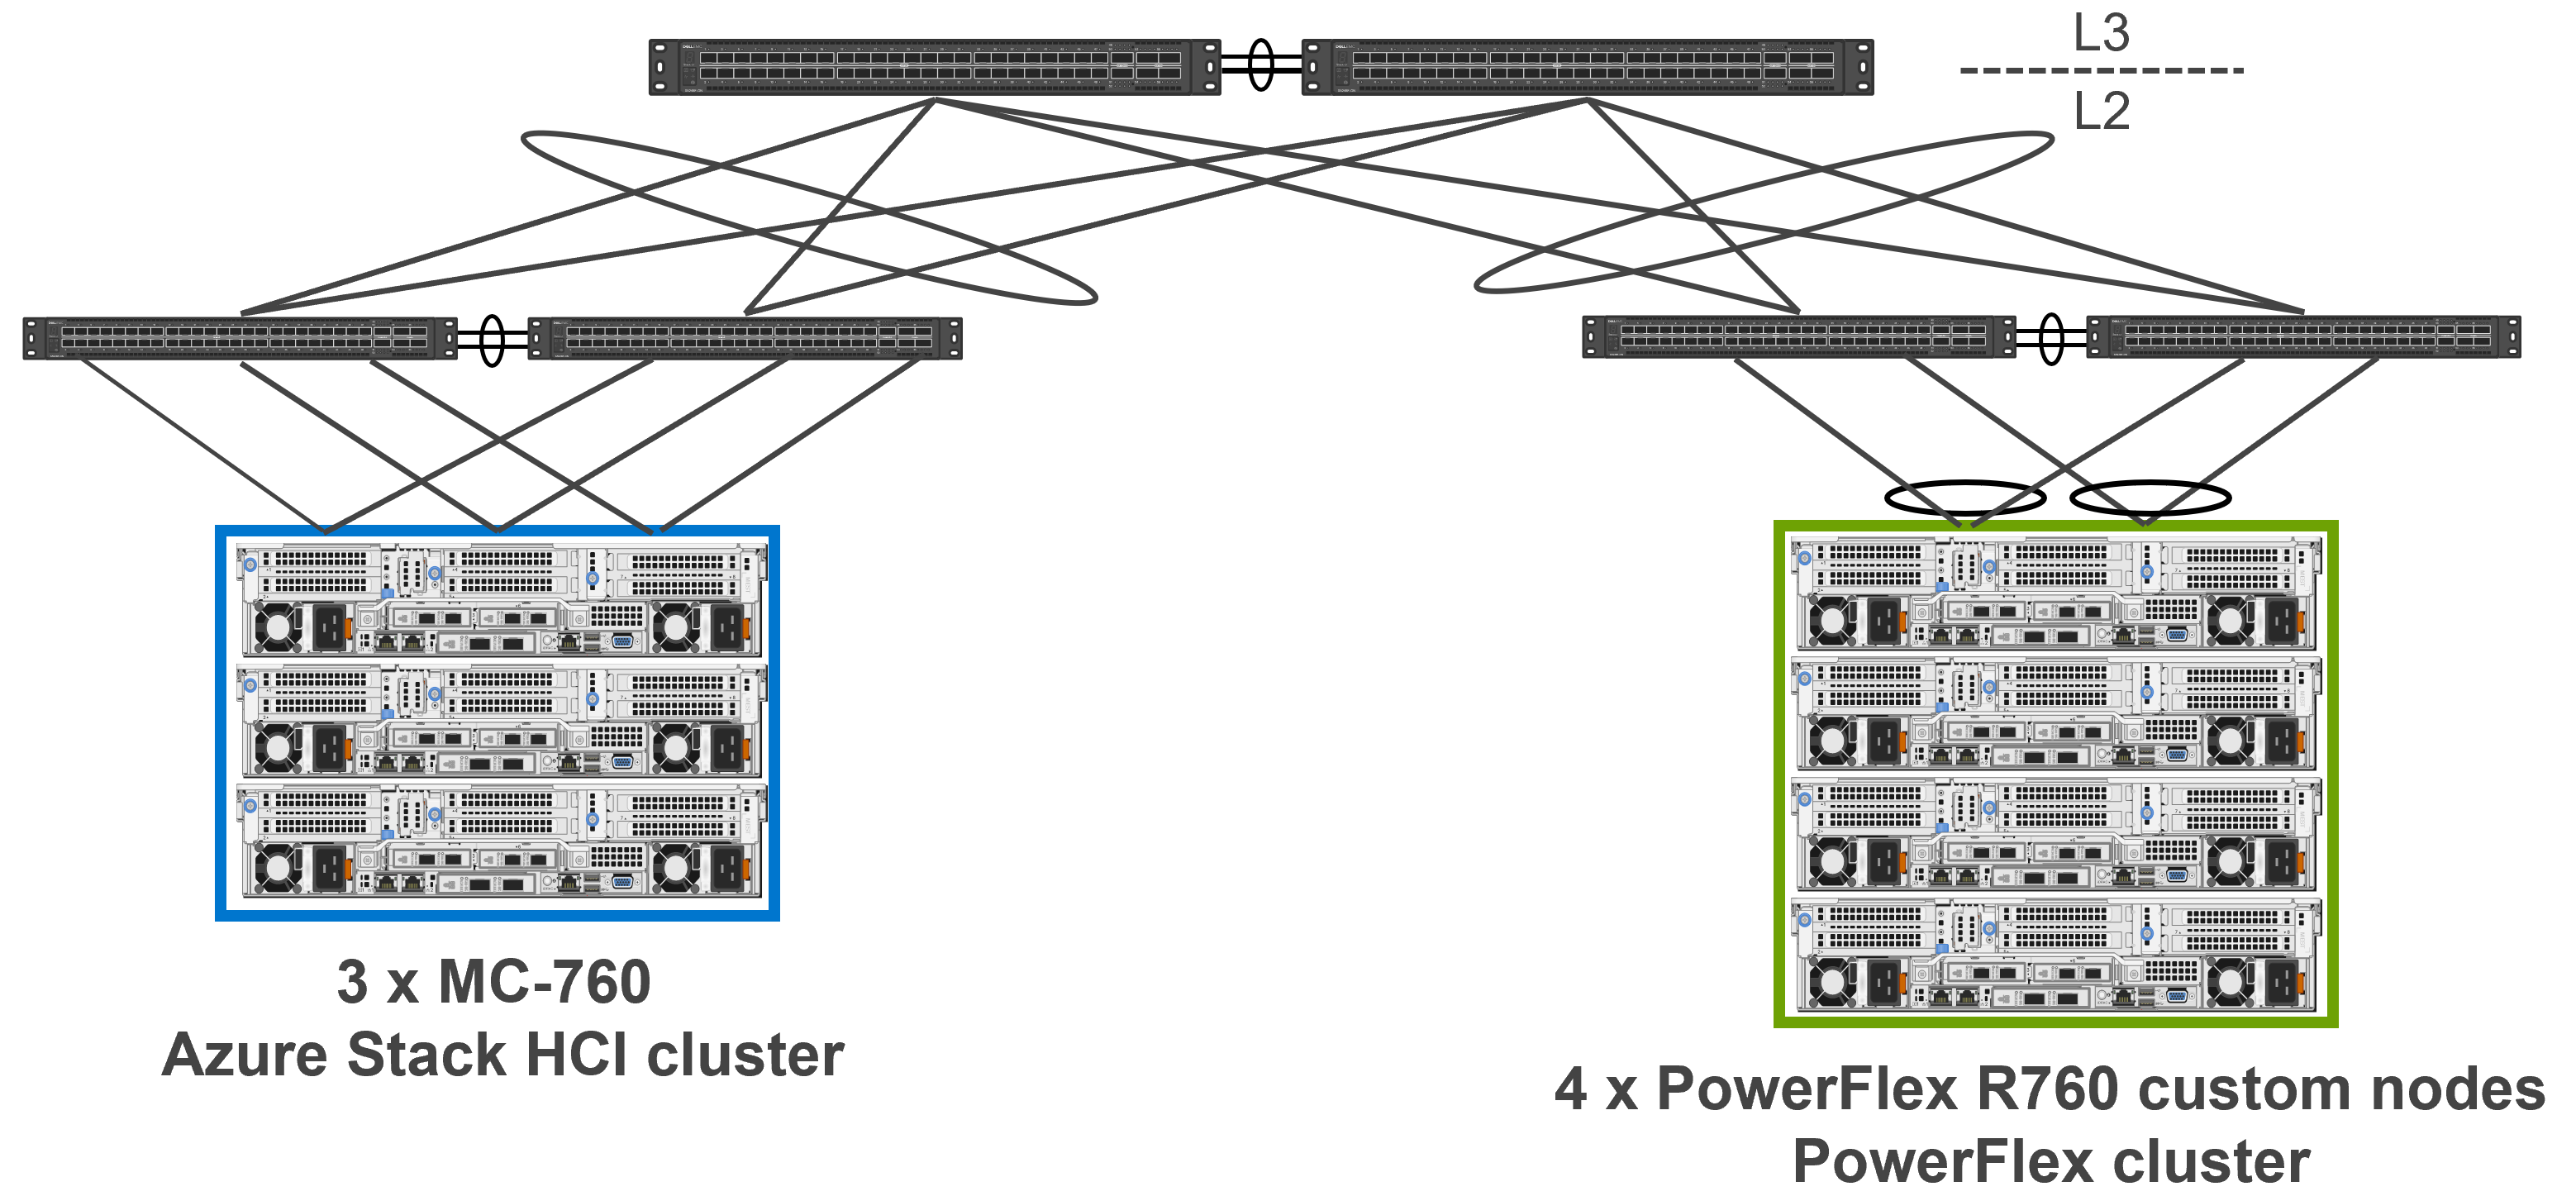 High-level network infrastructure